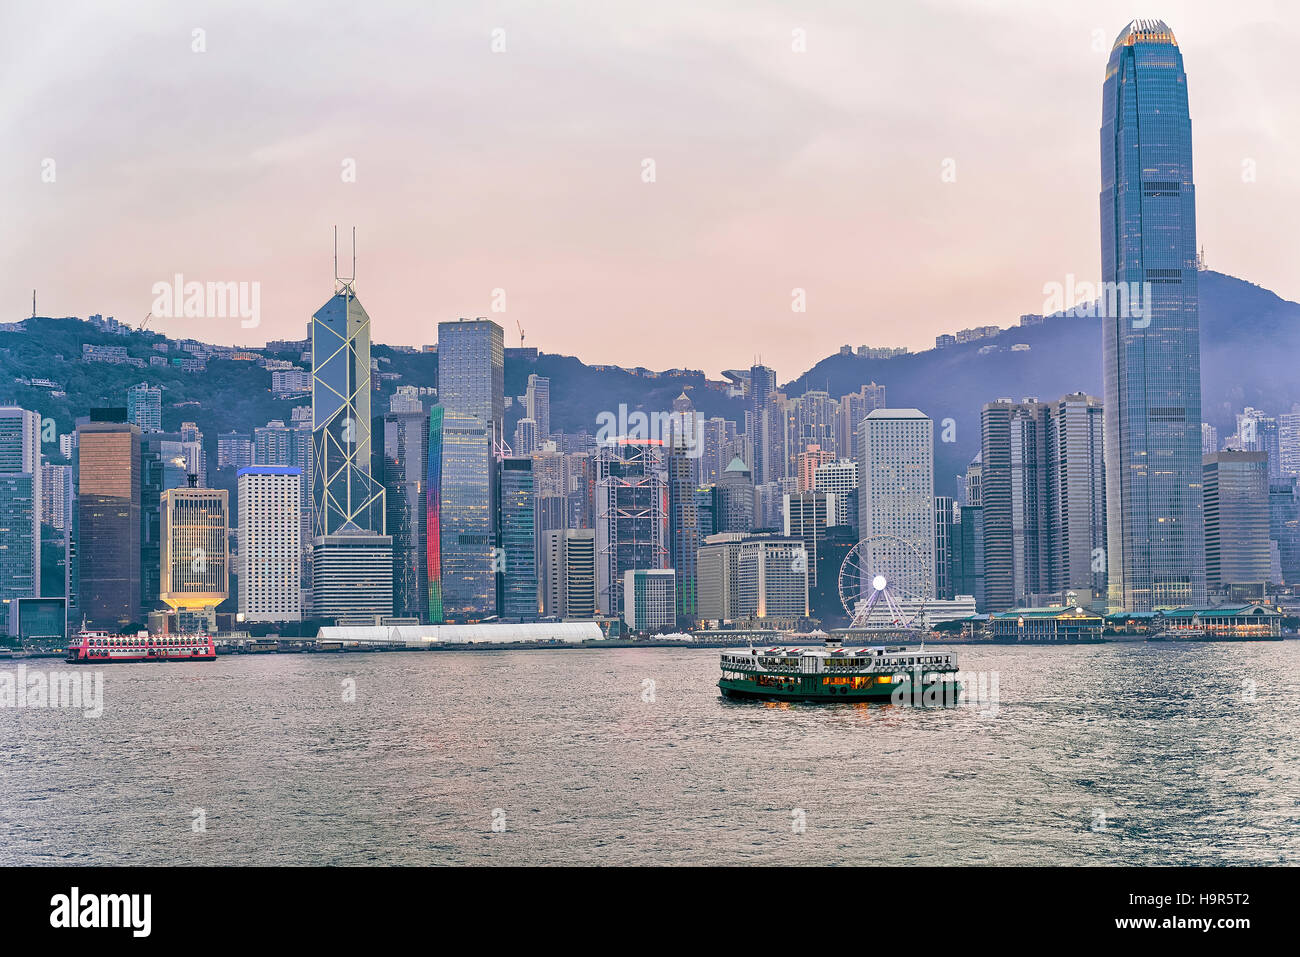 Star ferry and Victoria Harbor of Hong Kong. View from Kowloon on HK Island. Stock Photo